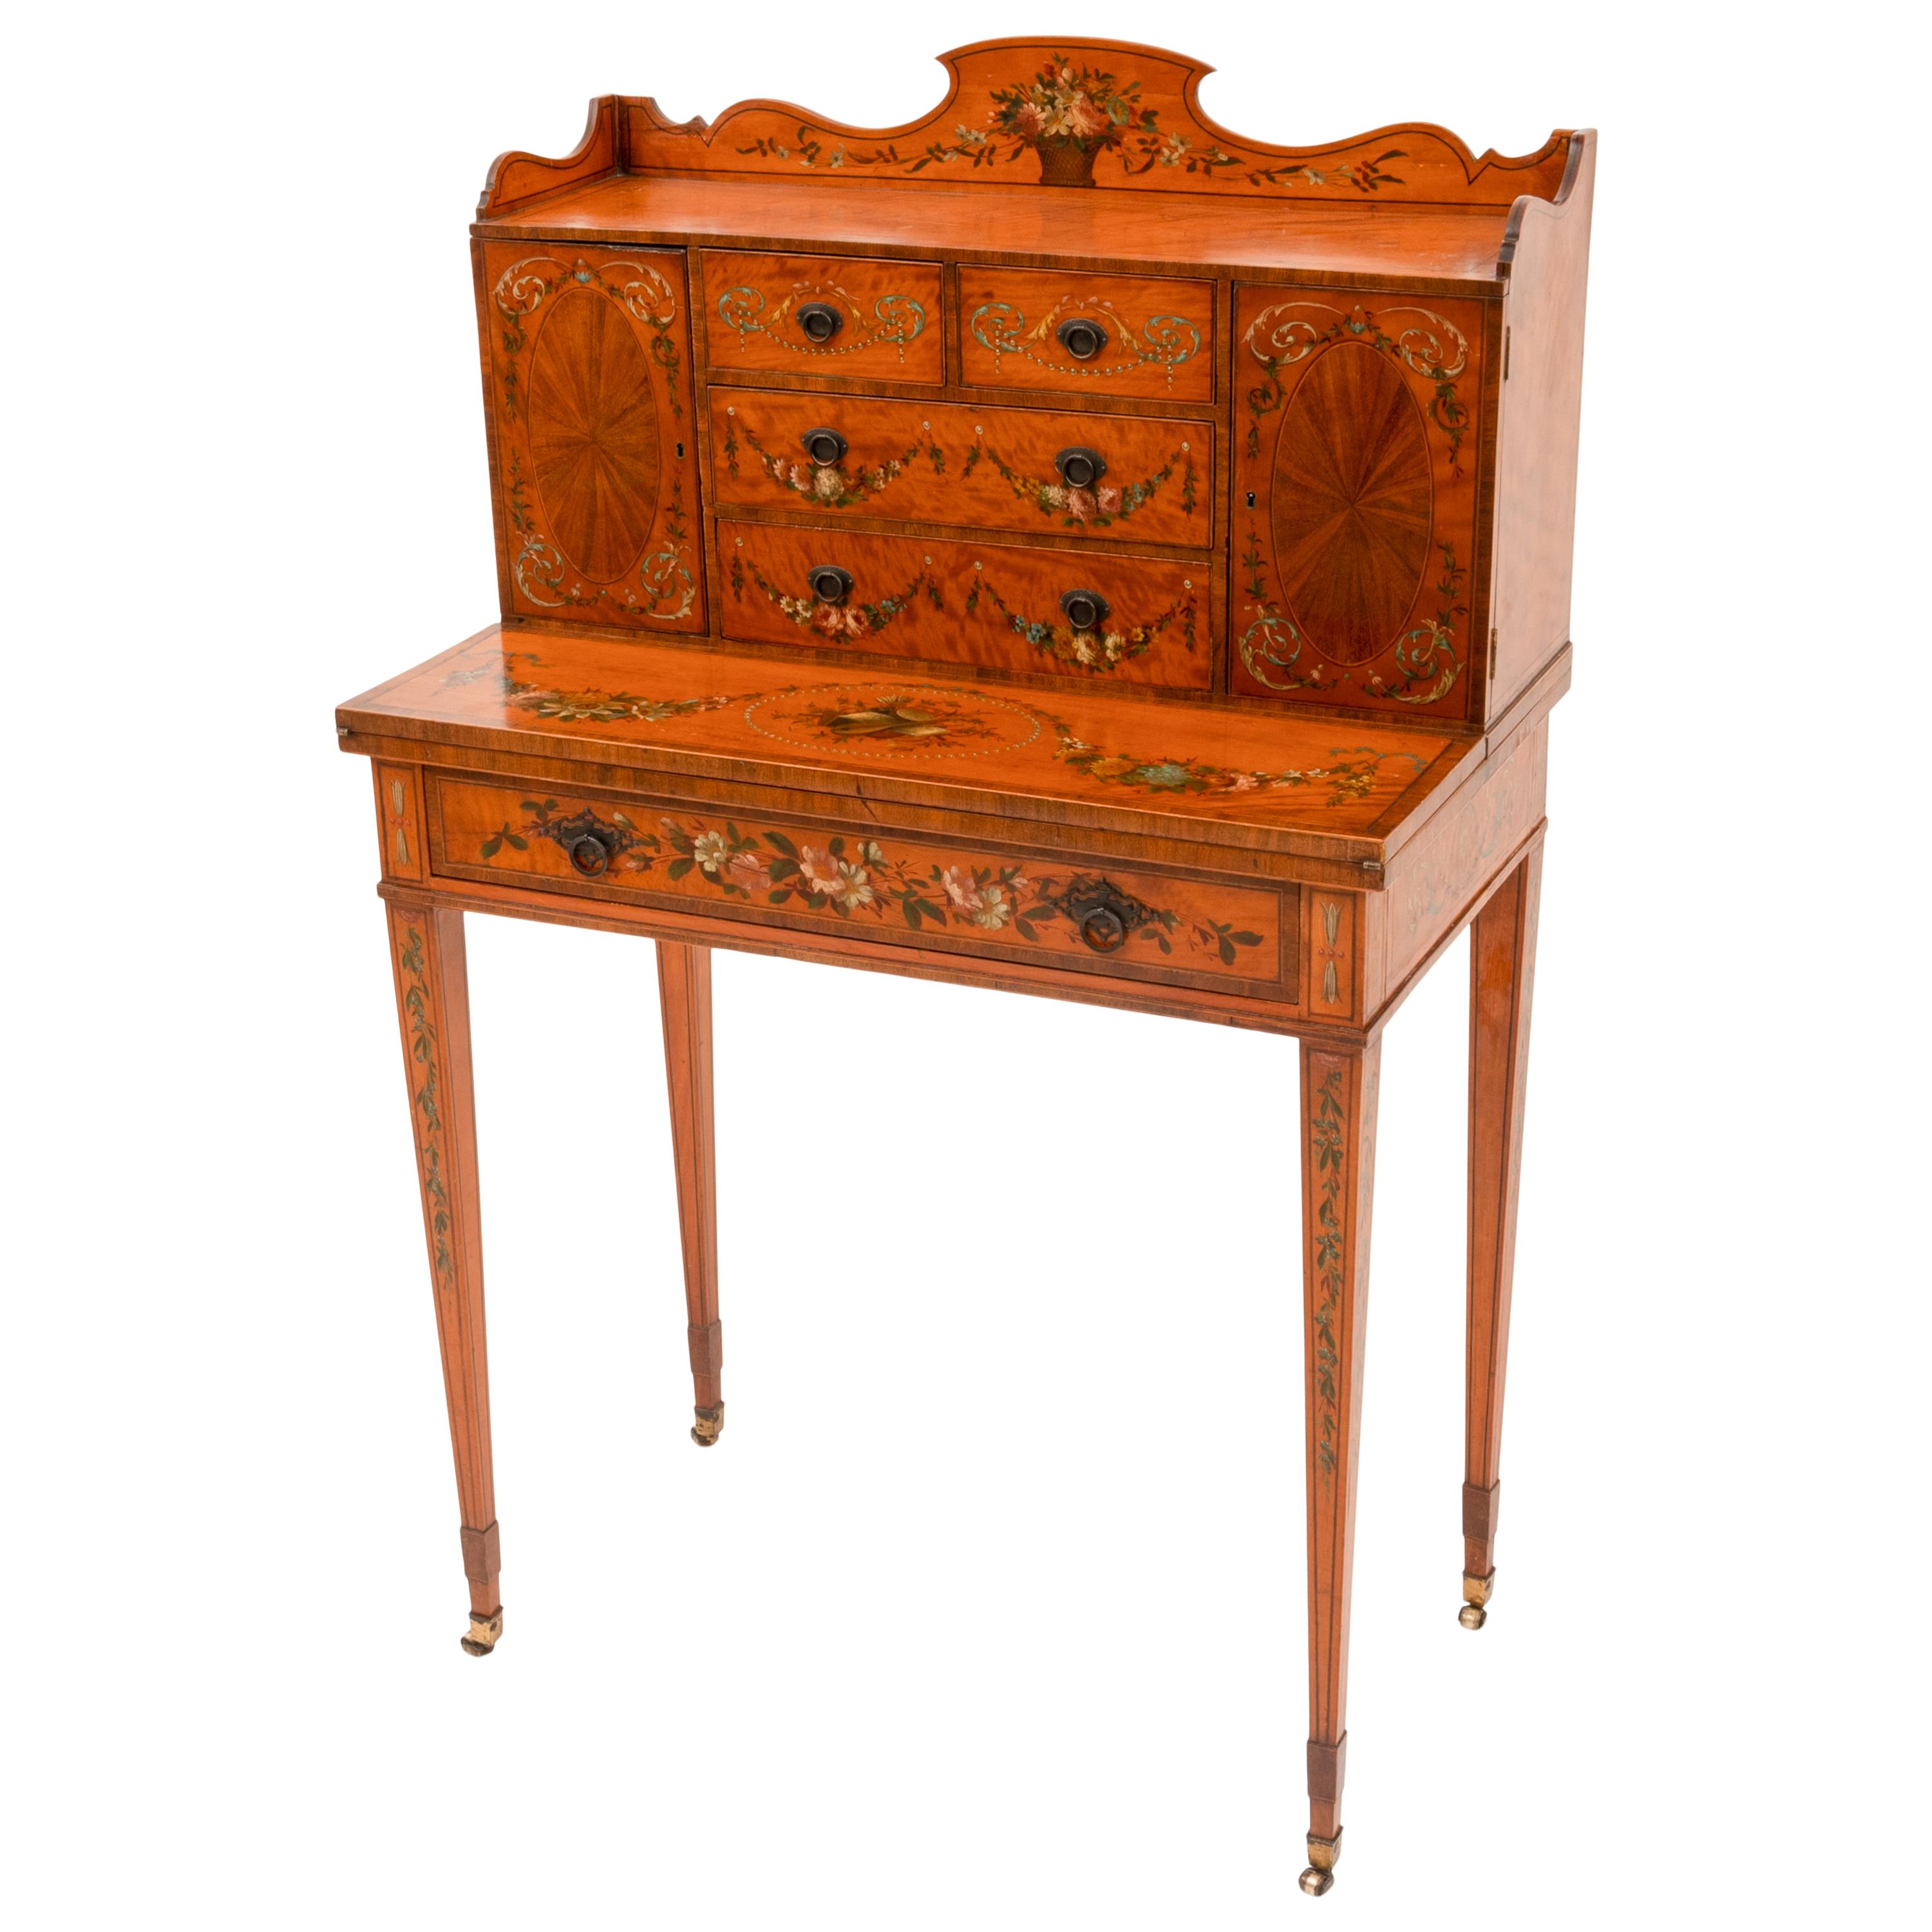 A fine antique Edwardian George III Adam Style Satinwood and marquetry paint decorated Bonheur du Jour, desk, attributed to Edwards & Roberts, circa 1890.
The desk with a shaped gallery paint decorated with a floral basket, the back of the desk